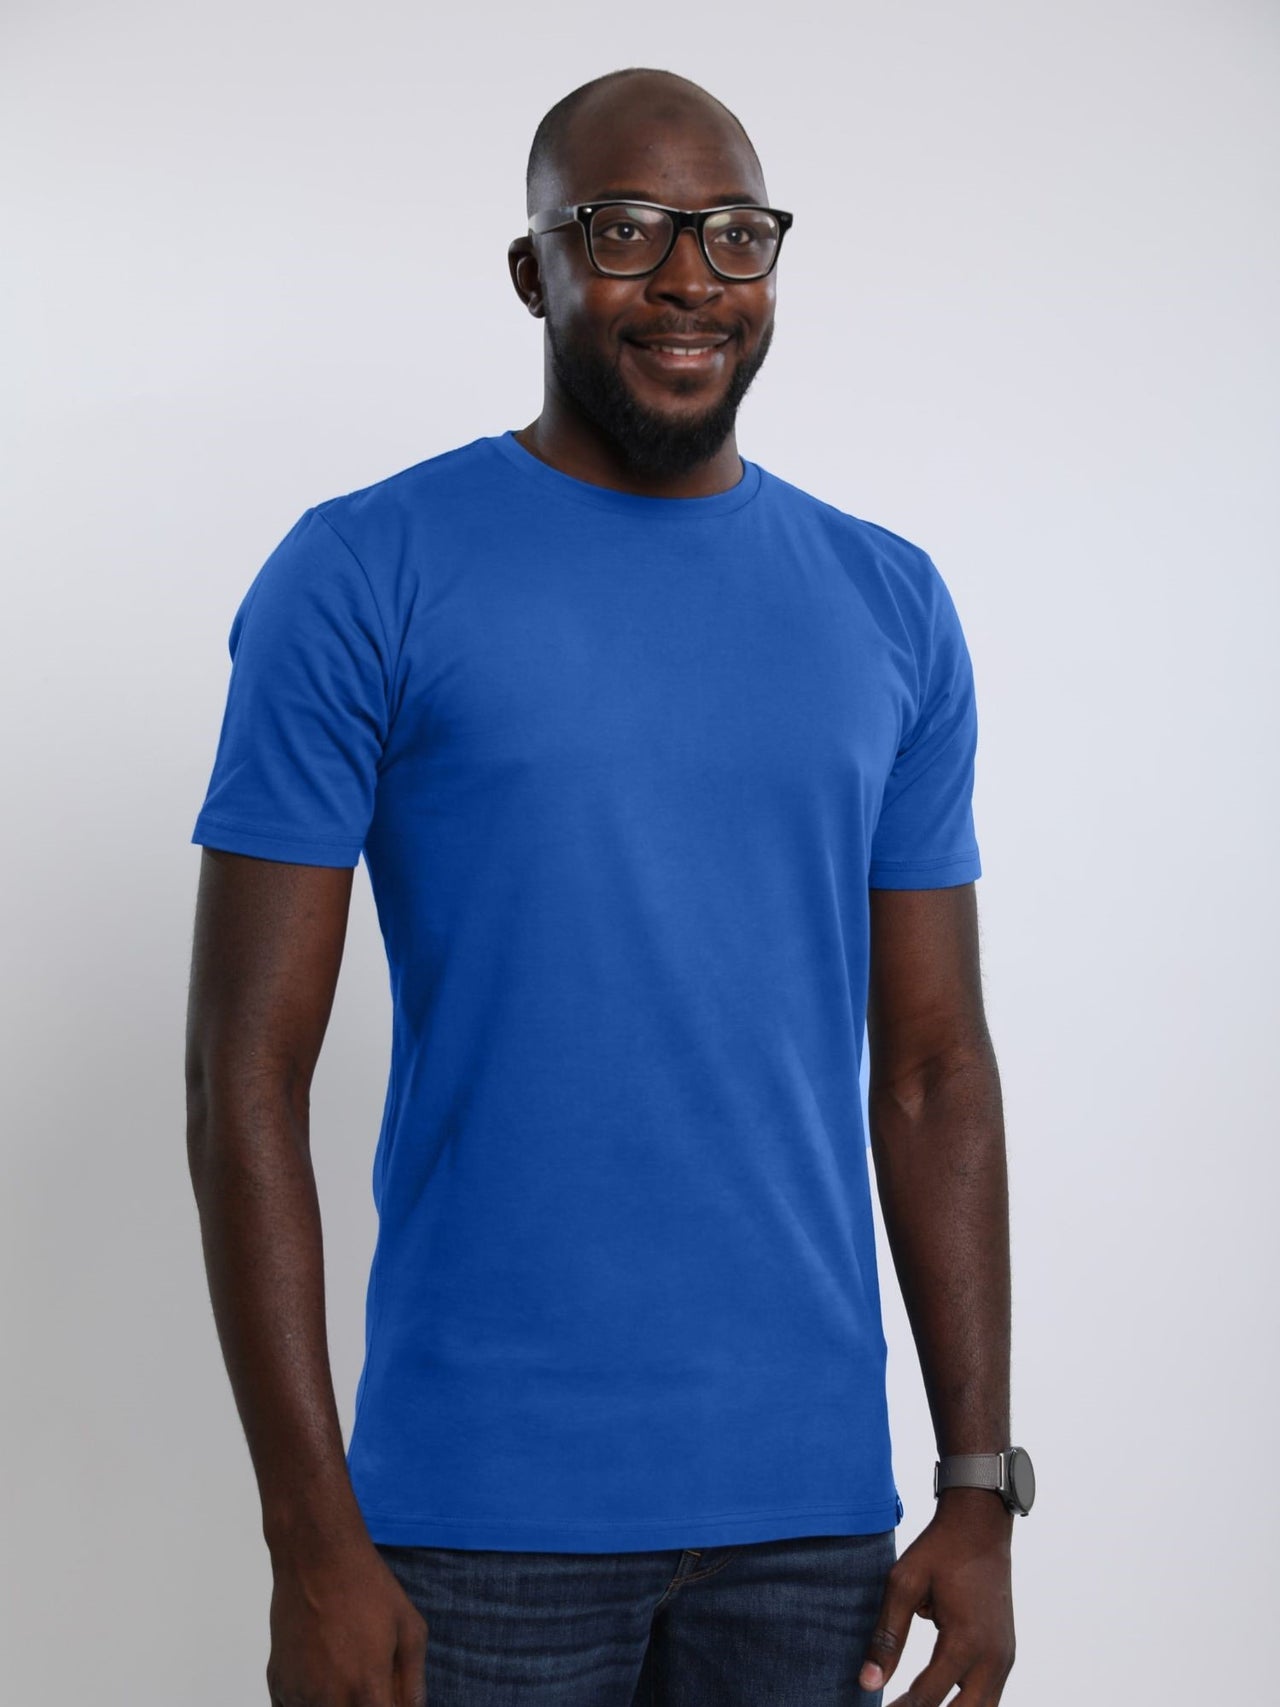 Organic Tall Long Sleeve T-Shirt, Fitted